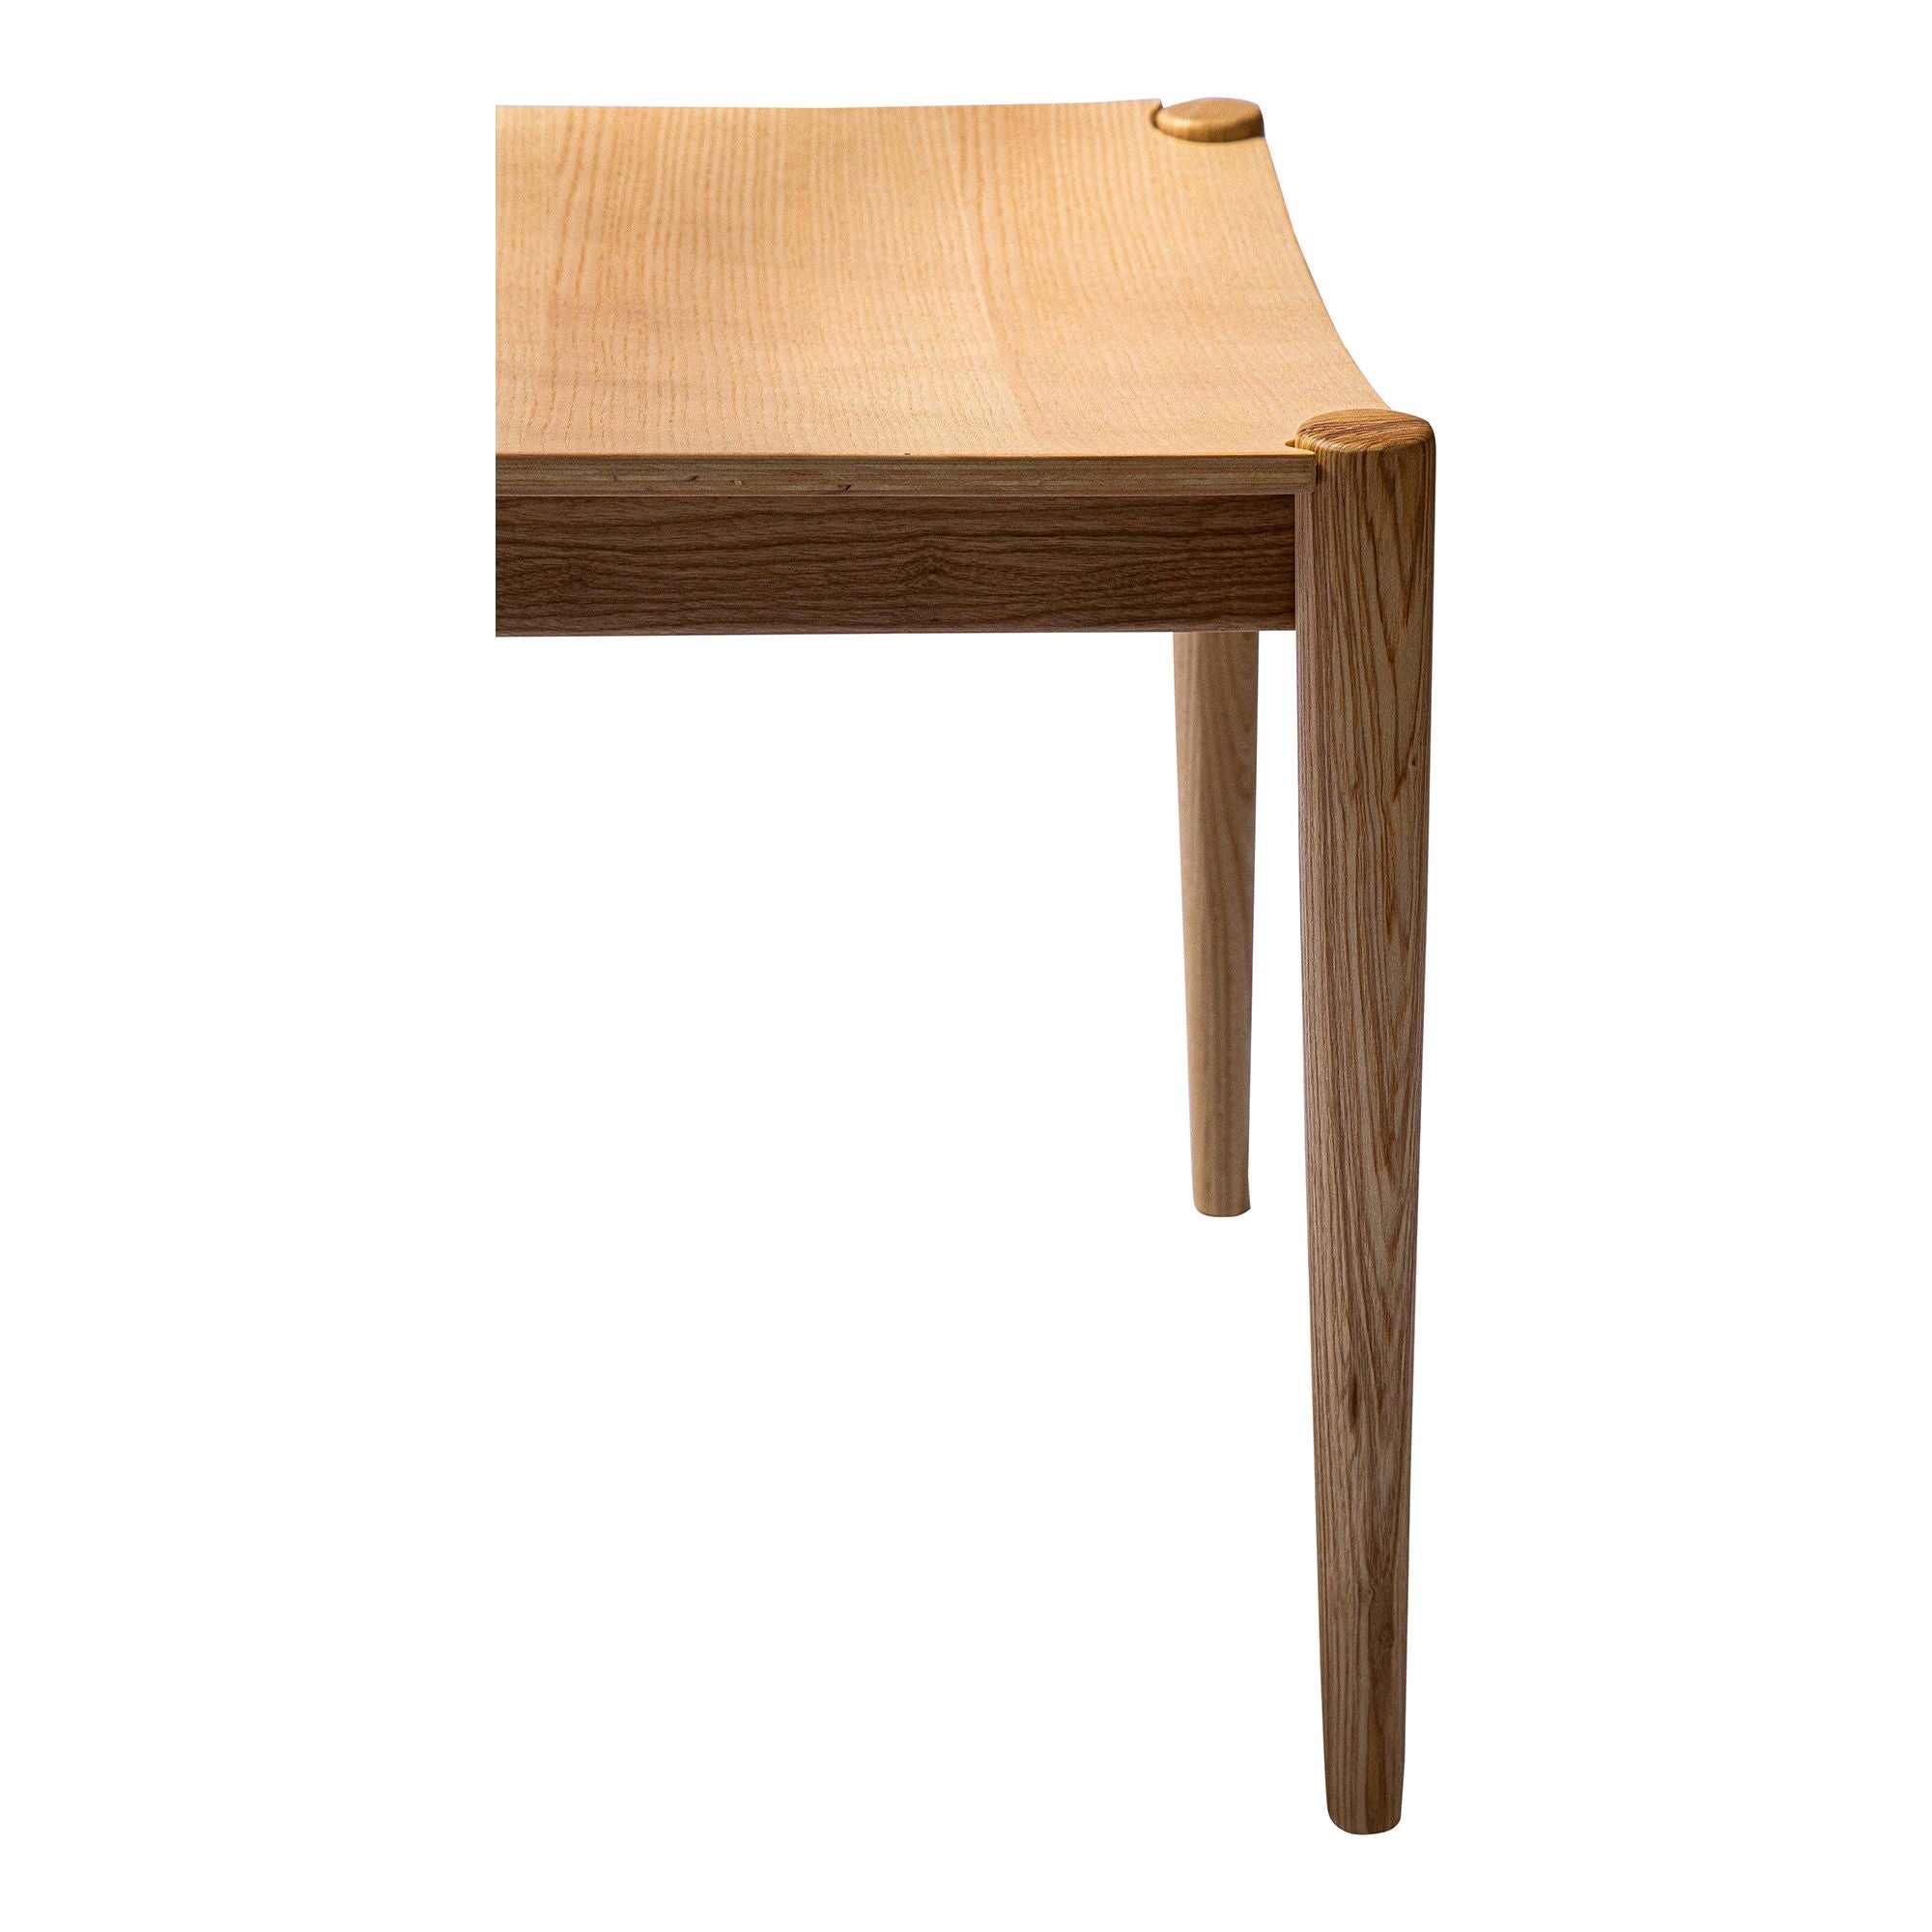 Day - Dining Chair - Light Brown